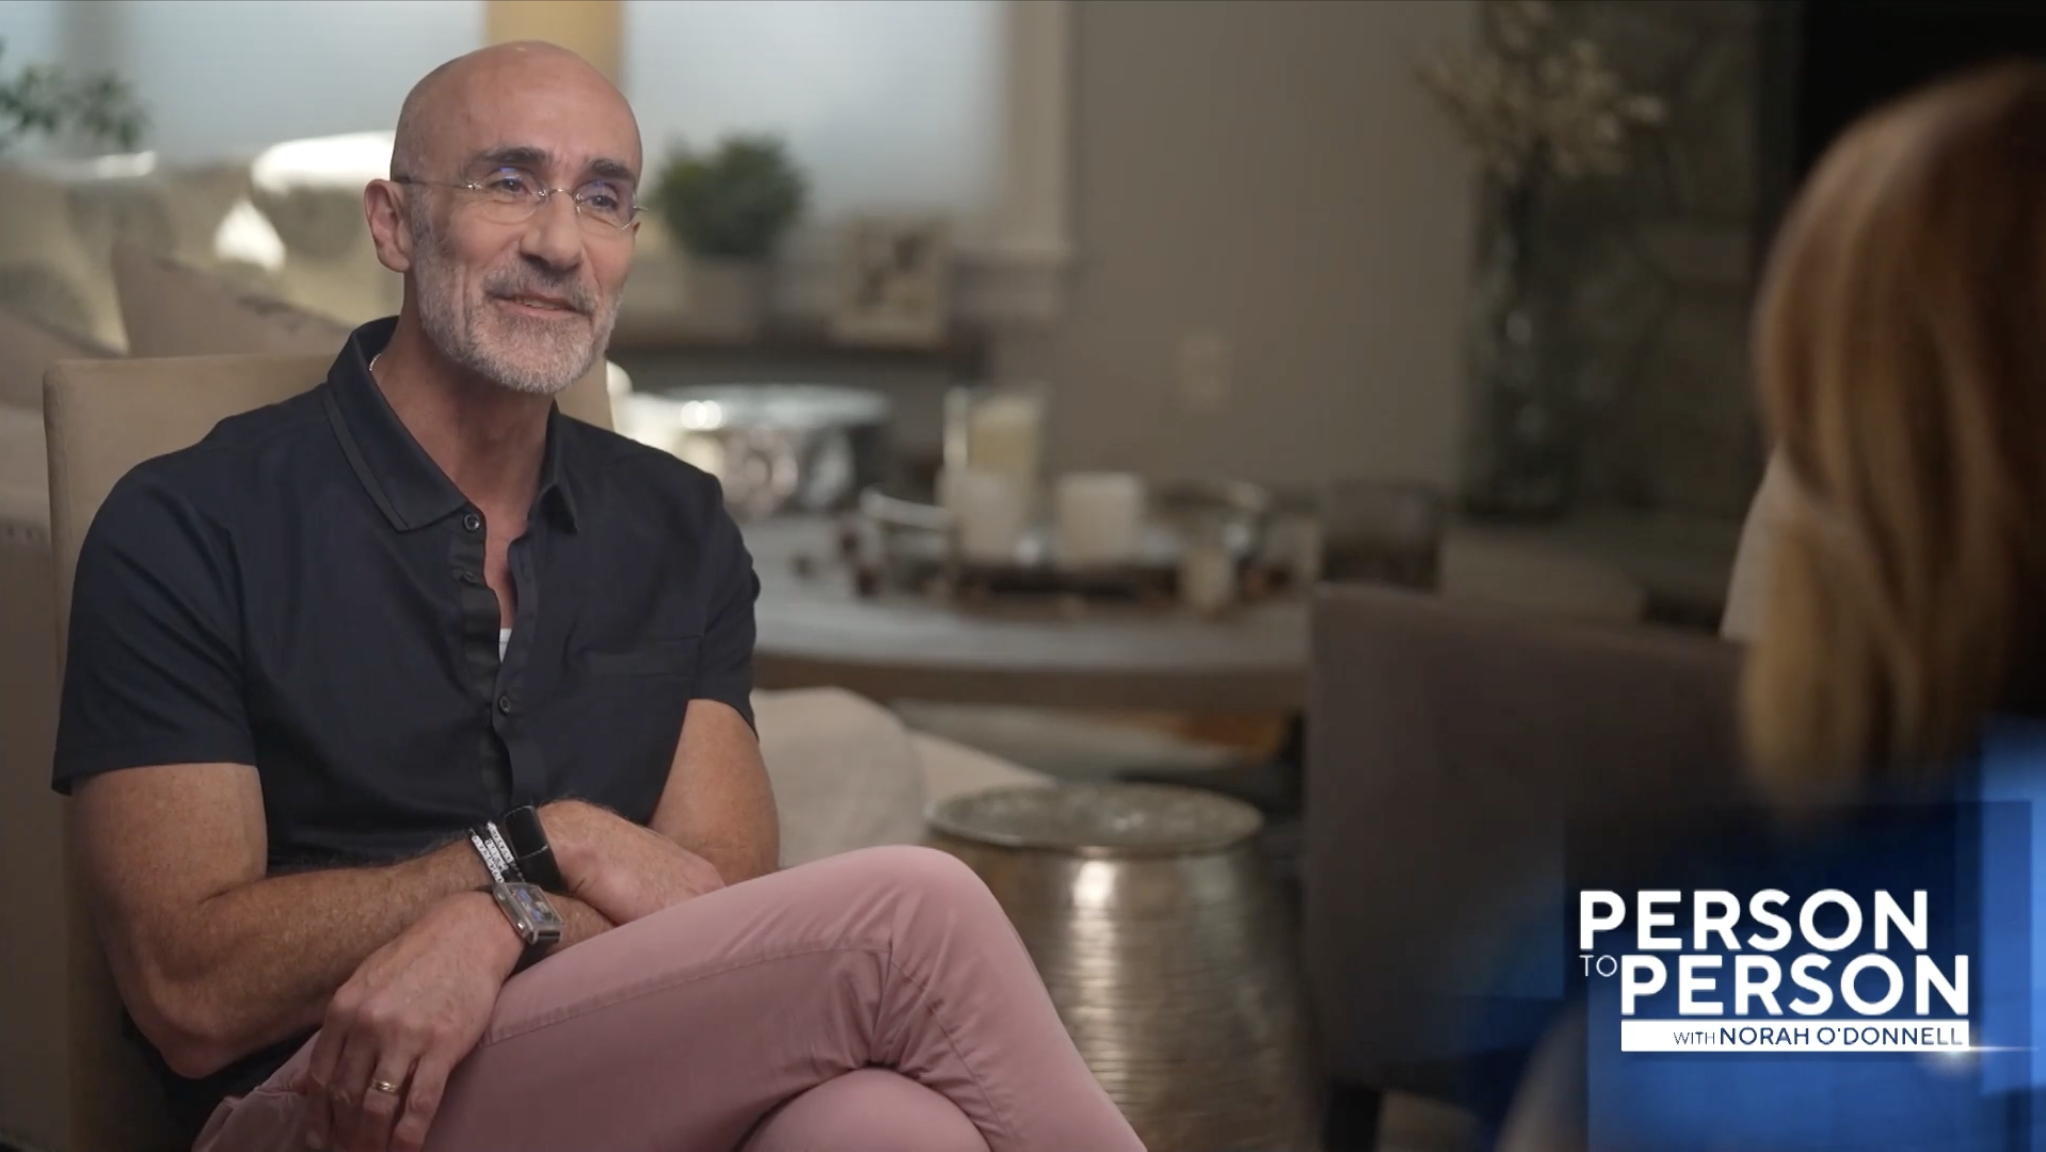 CBS News Person to Person: Norah O’Donnell interviews author Arthur Brooks